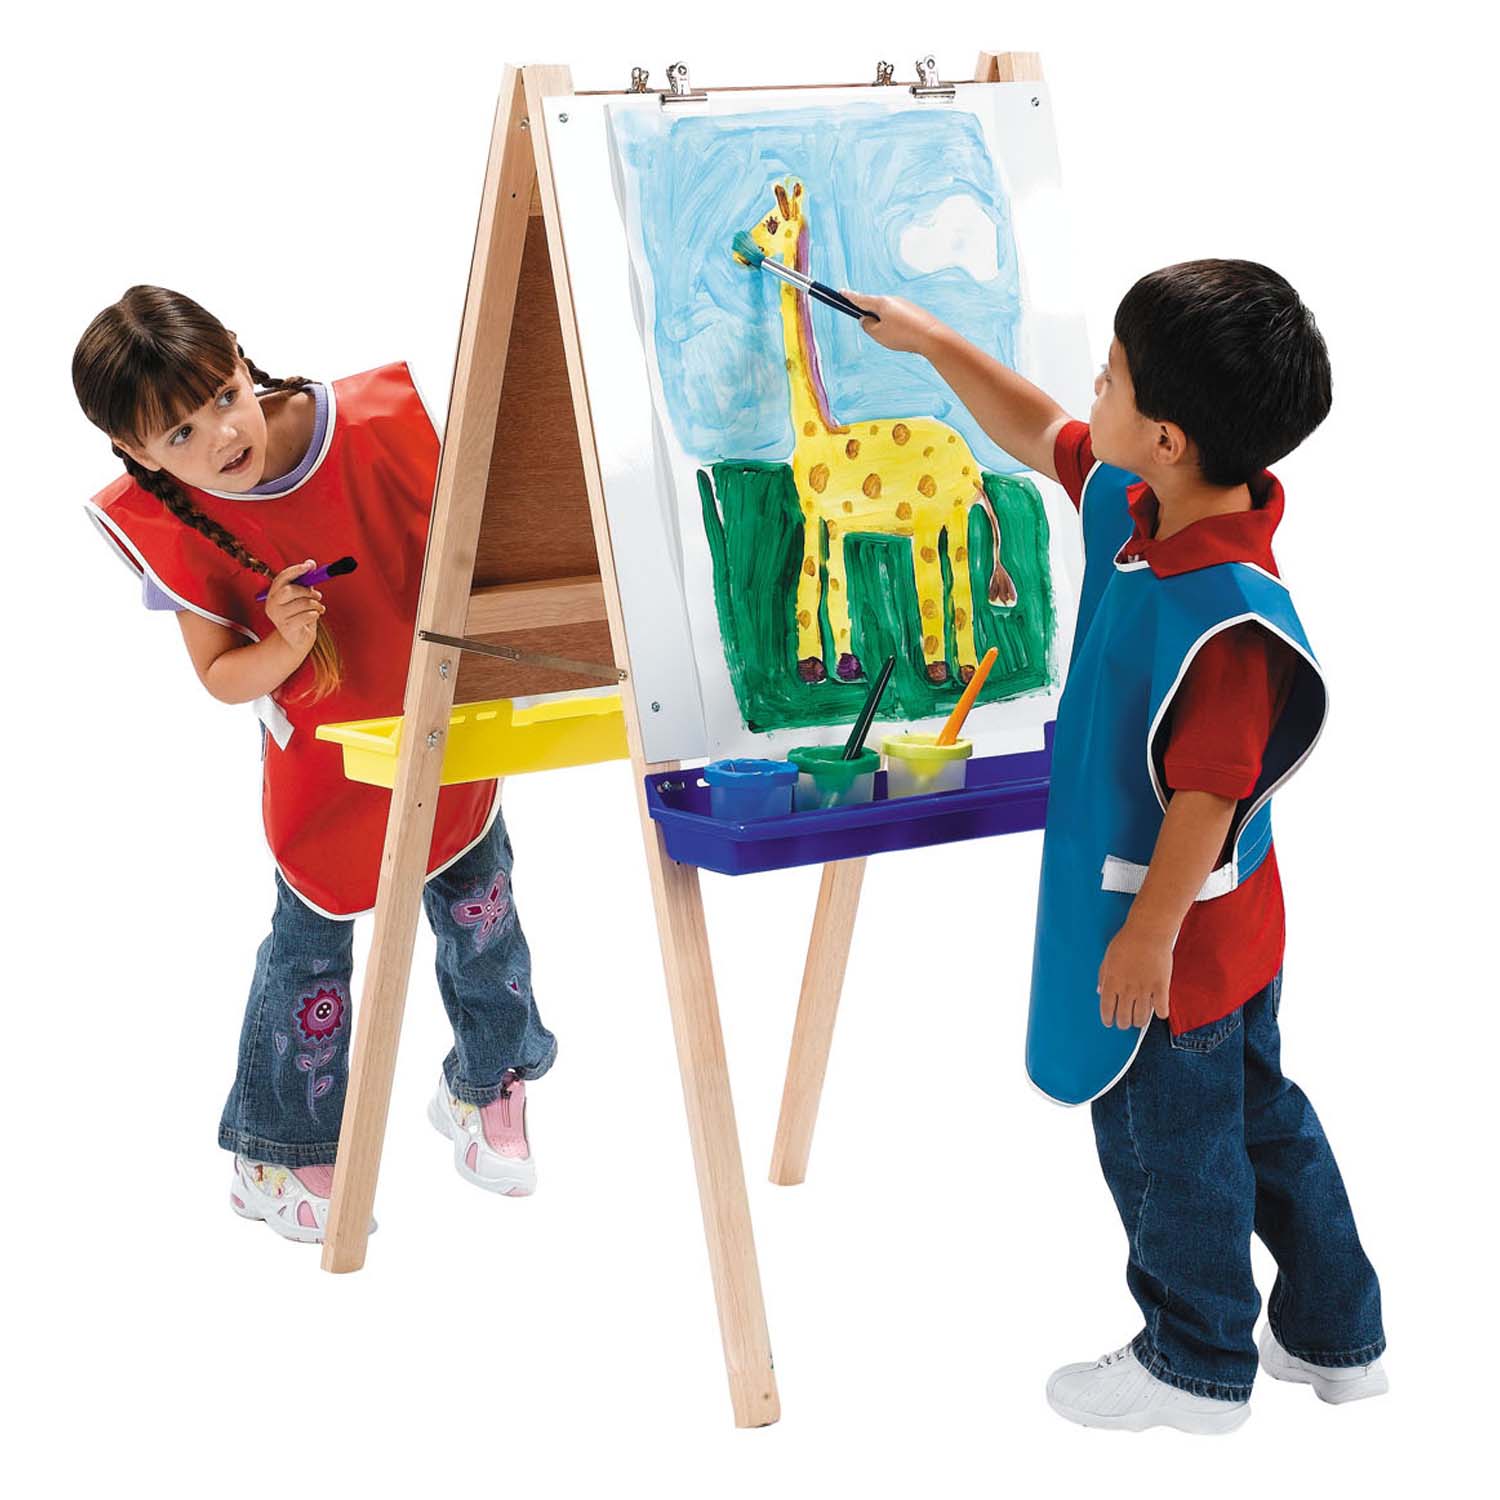 Top 9 Easel Crafts & Activities for Toddlers: Easel Crafts & Activities for  toddlers